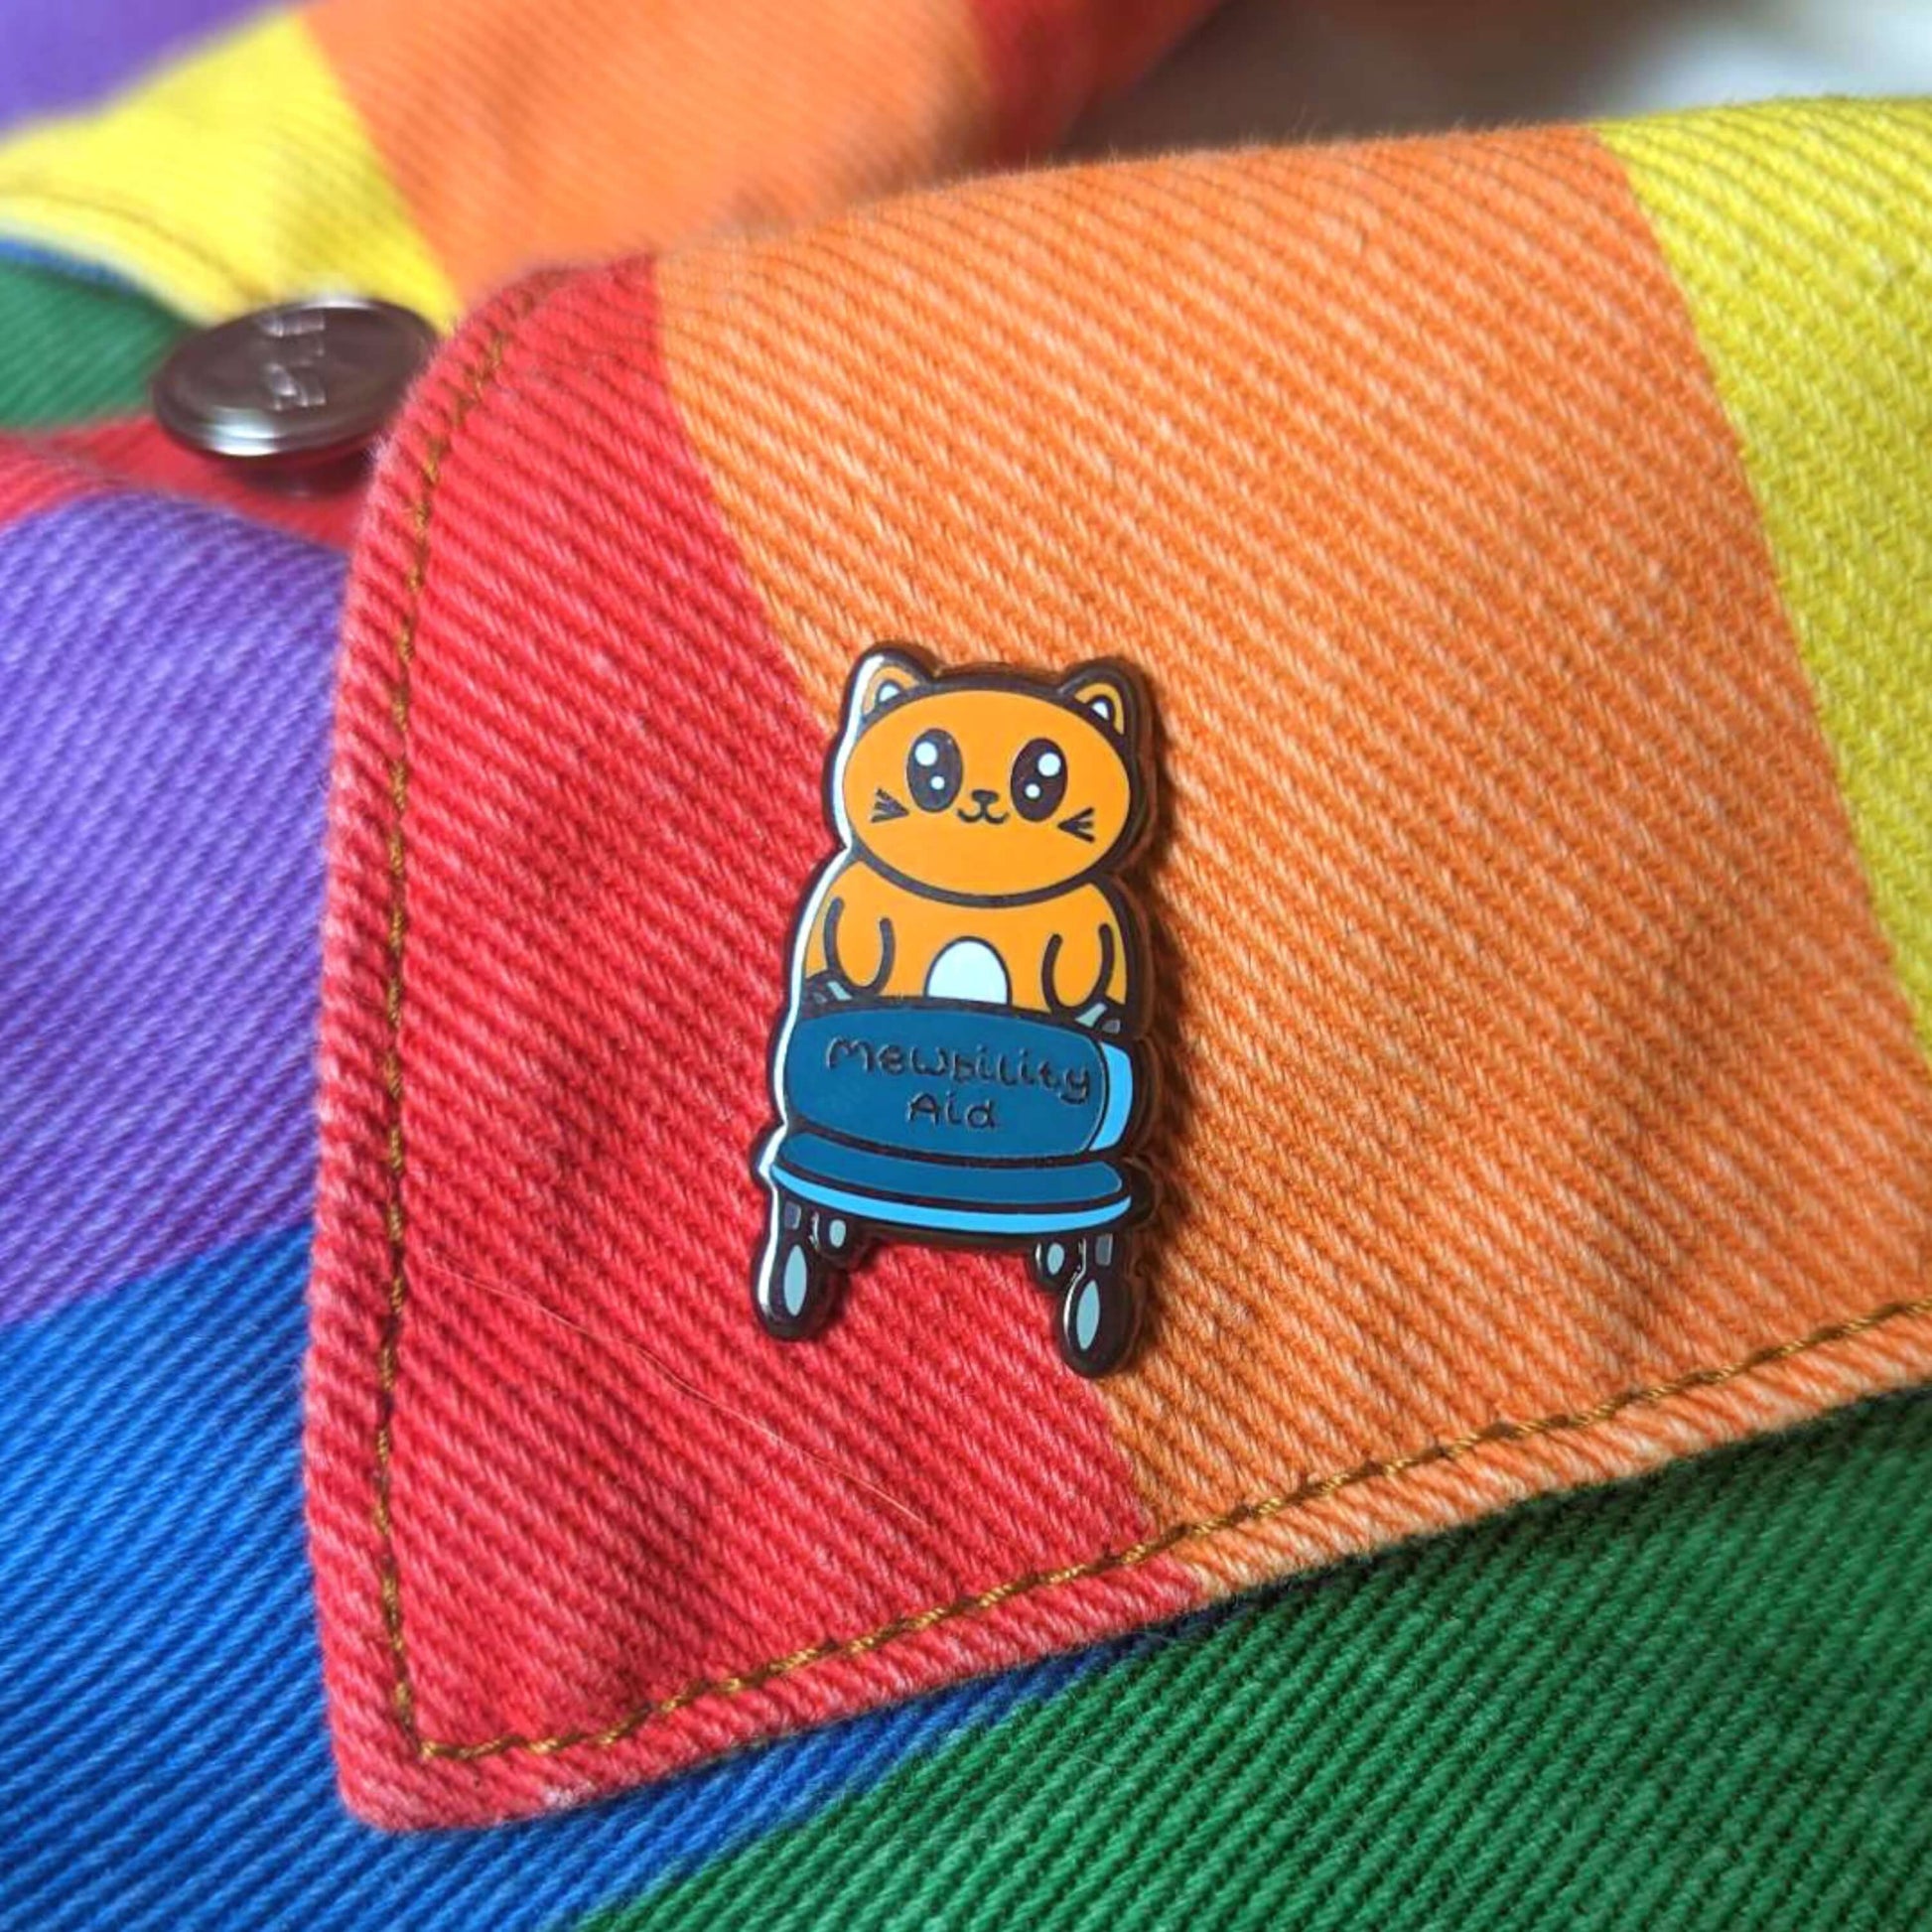 The Mewbility Aid Cat Enamel Pin - Mobility Aid on a rainbow denim jacket. An orange smiling cat walking upright with a blue mobility aid, across the walking chair reads 'mewbility aid'. The hand drawn designs is raising awareness for mobility aids.